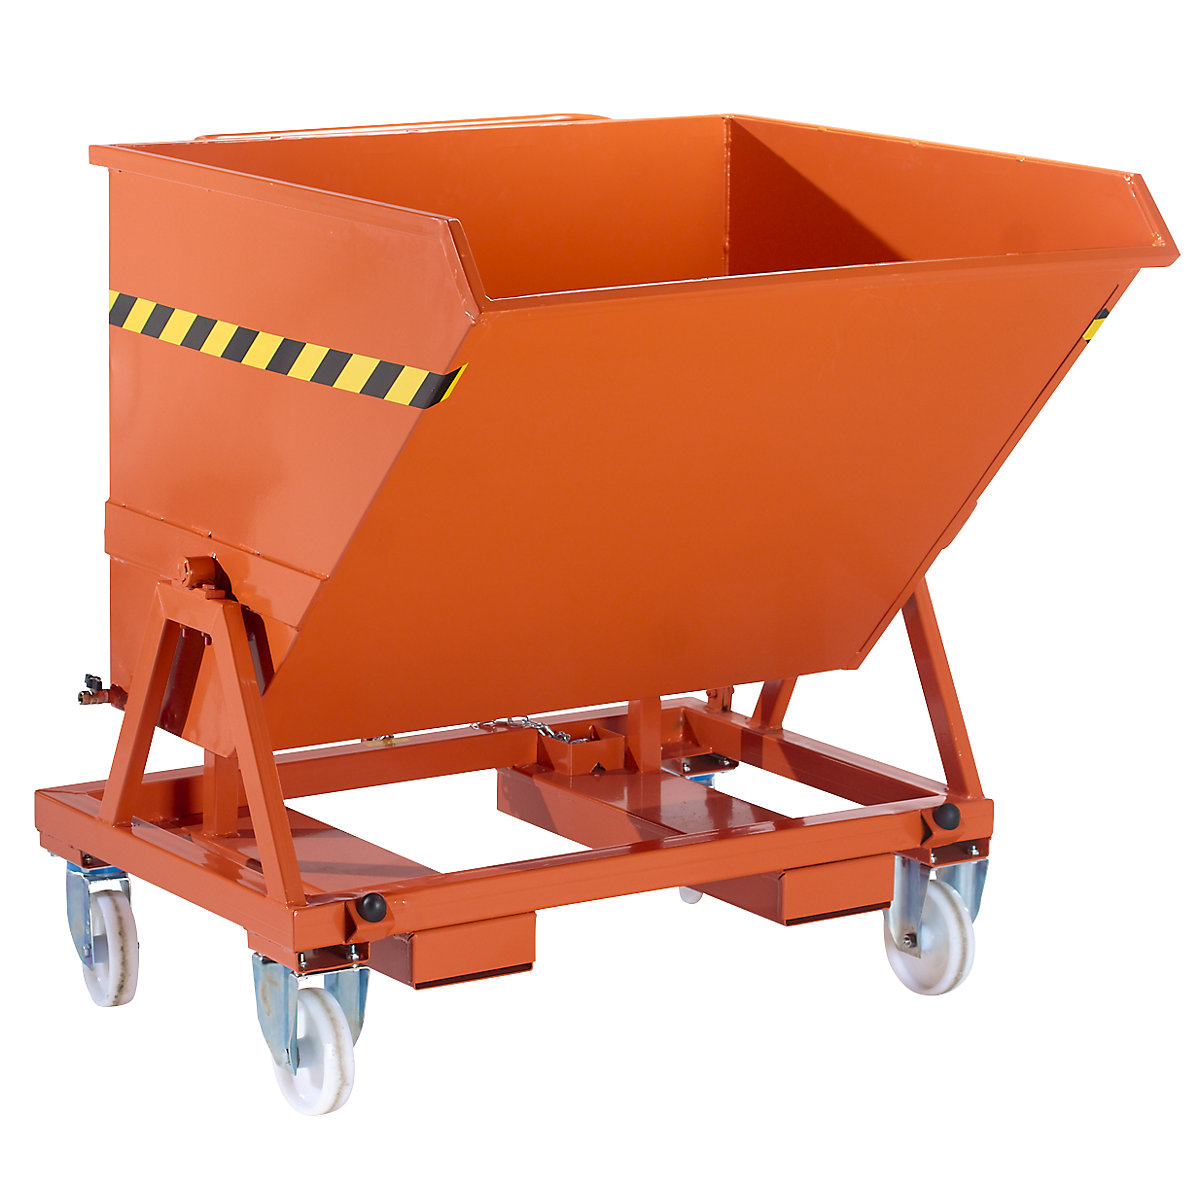 Mobile tilting skip with tilting mechanism, with sieve insert, max. load 1000 kg, capacity 0.675 m³-11